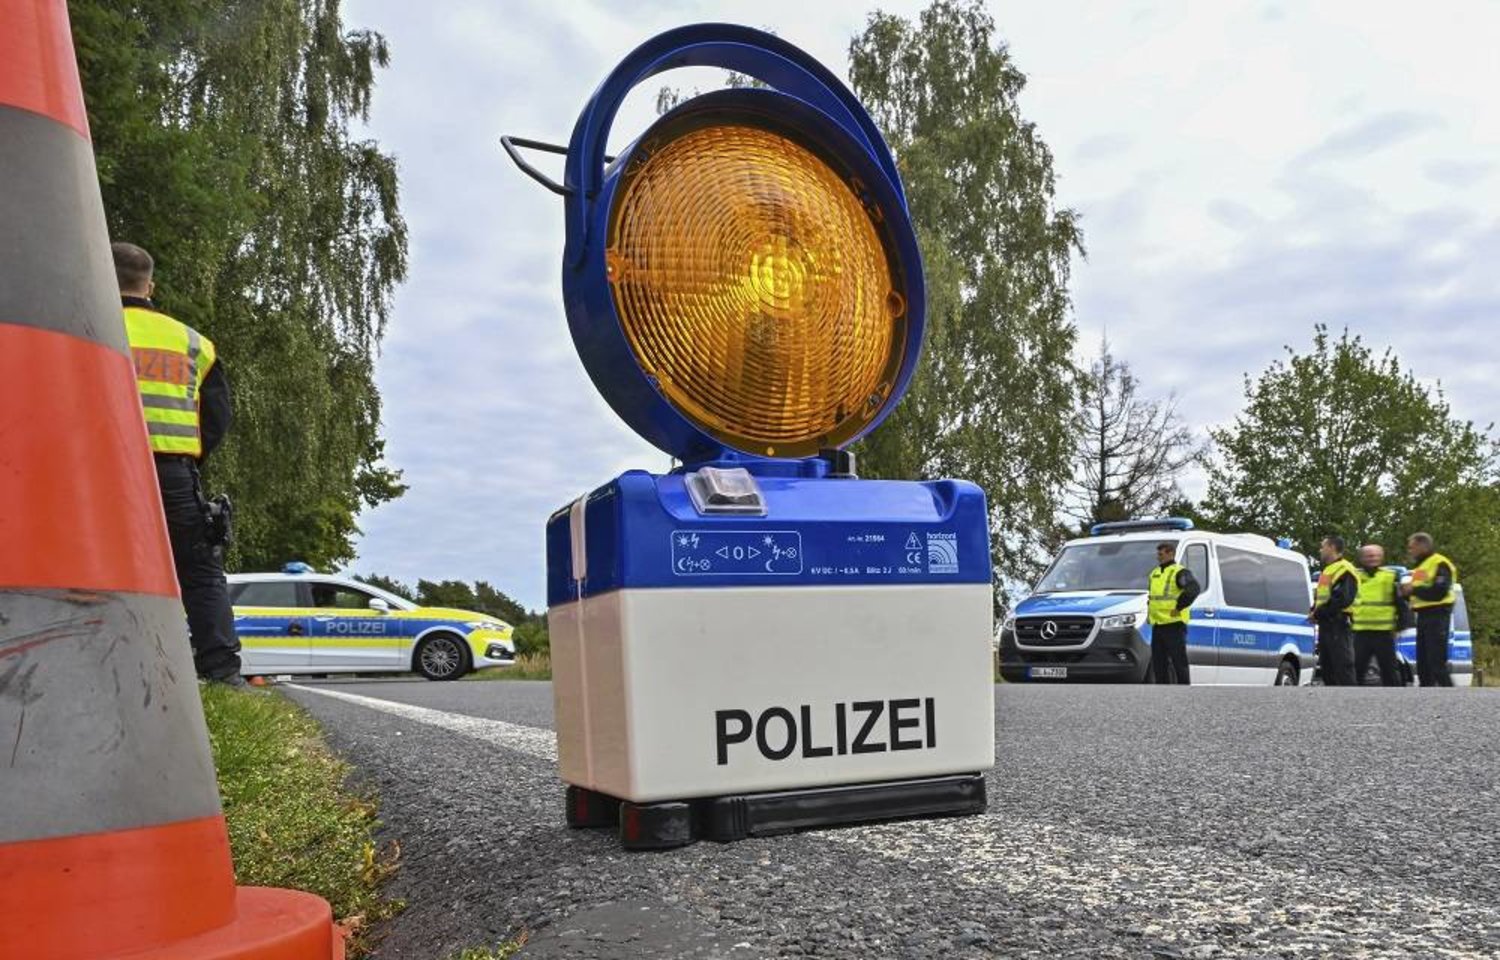 A warning signal stands on the road during a police check against smuggling of migrants, in Roggosen, Germany, Monday, Sept. 25, 2023. (dpa via AP)